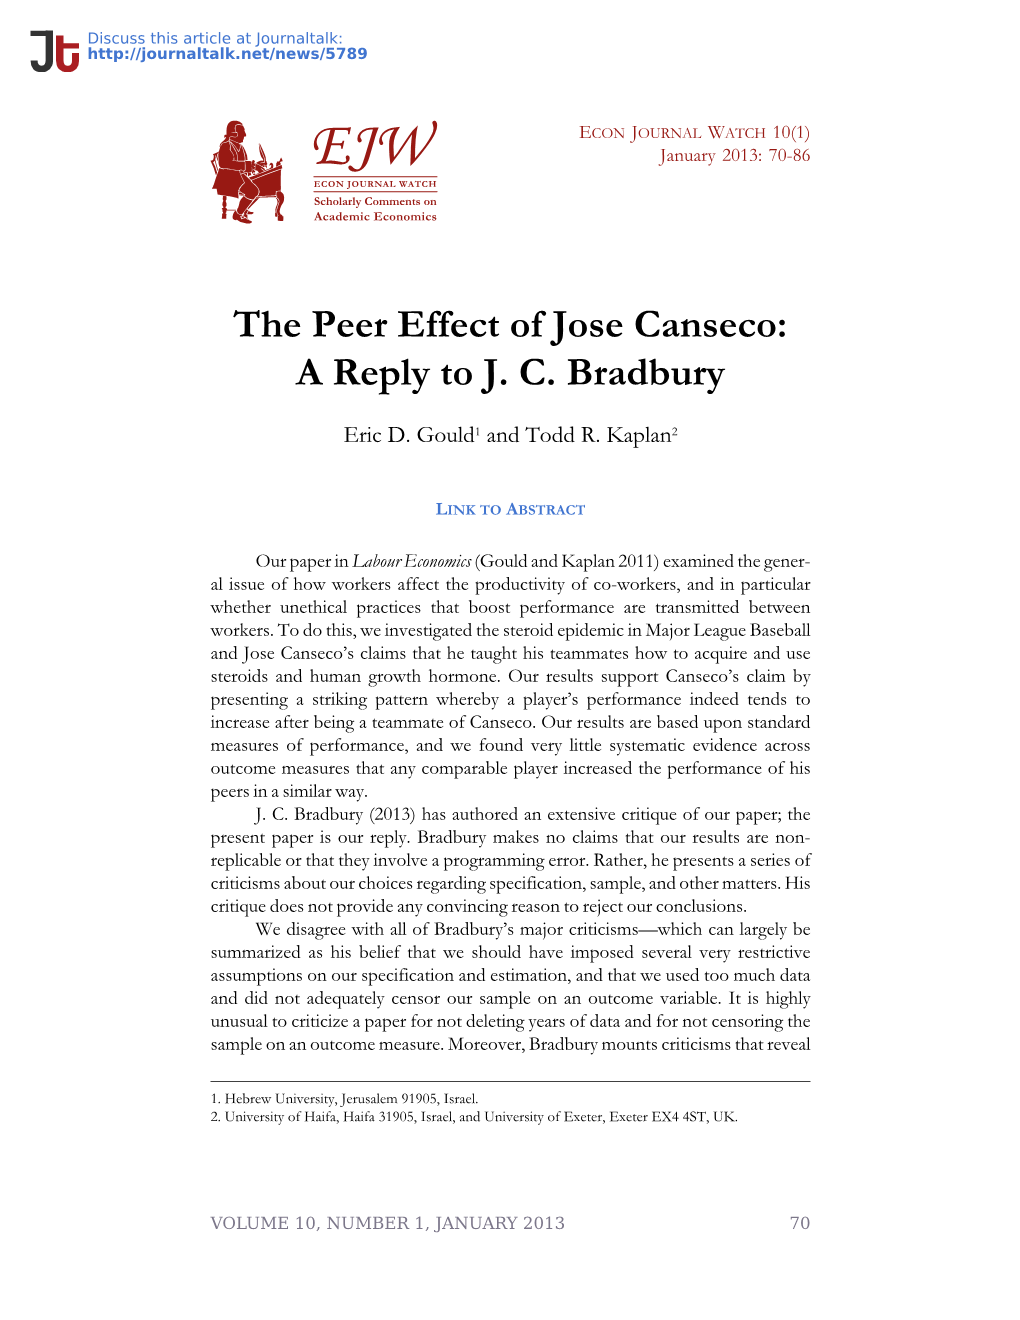 Peer Effects,Steroids,Baseball,Jose Canseco